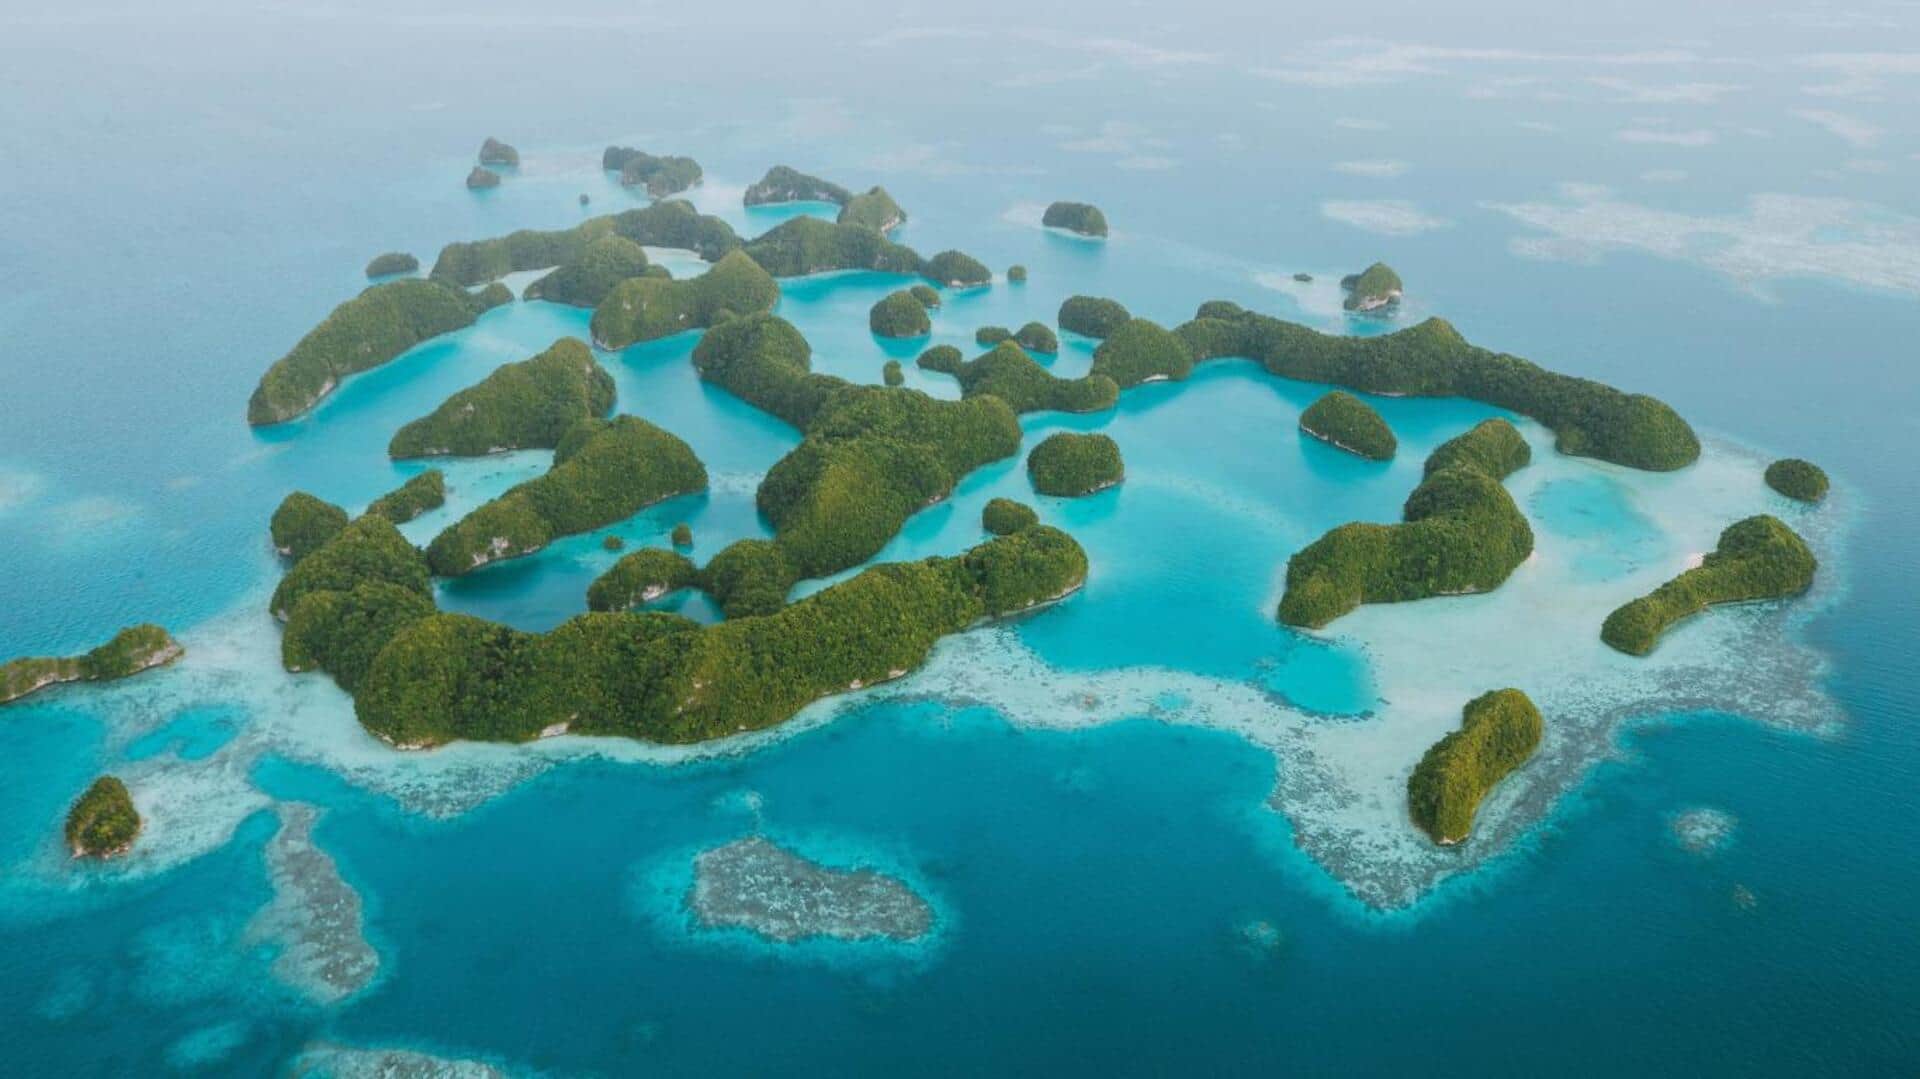 Discover Palau's aquatic splendor with these amazing recommendations